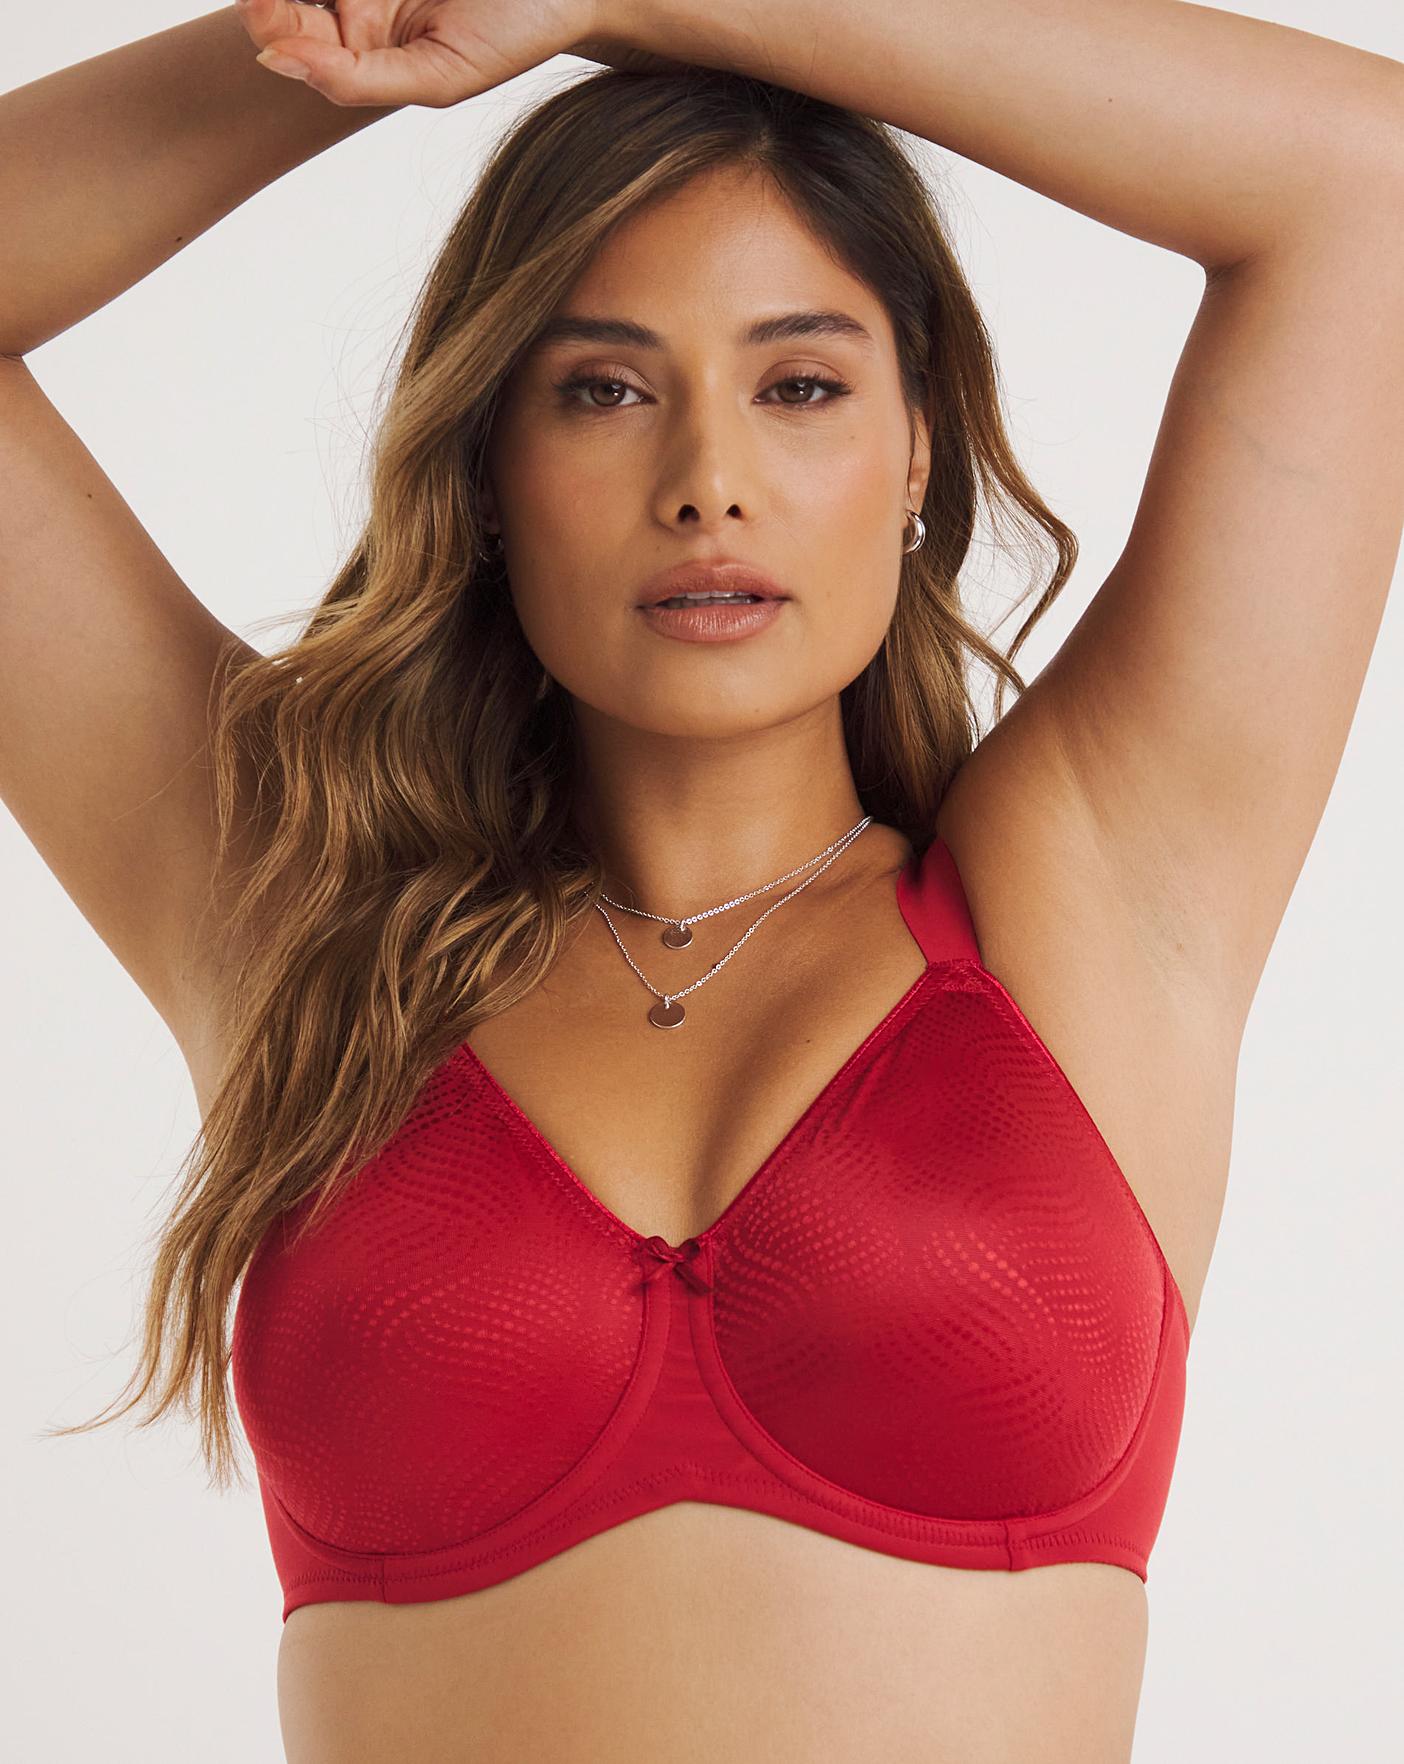 This Essential Minimiser bra from Triumph wired is an on-trend